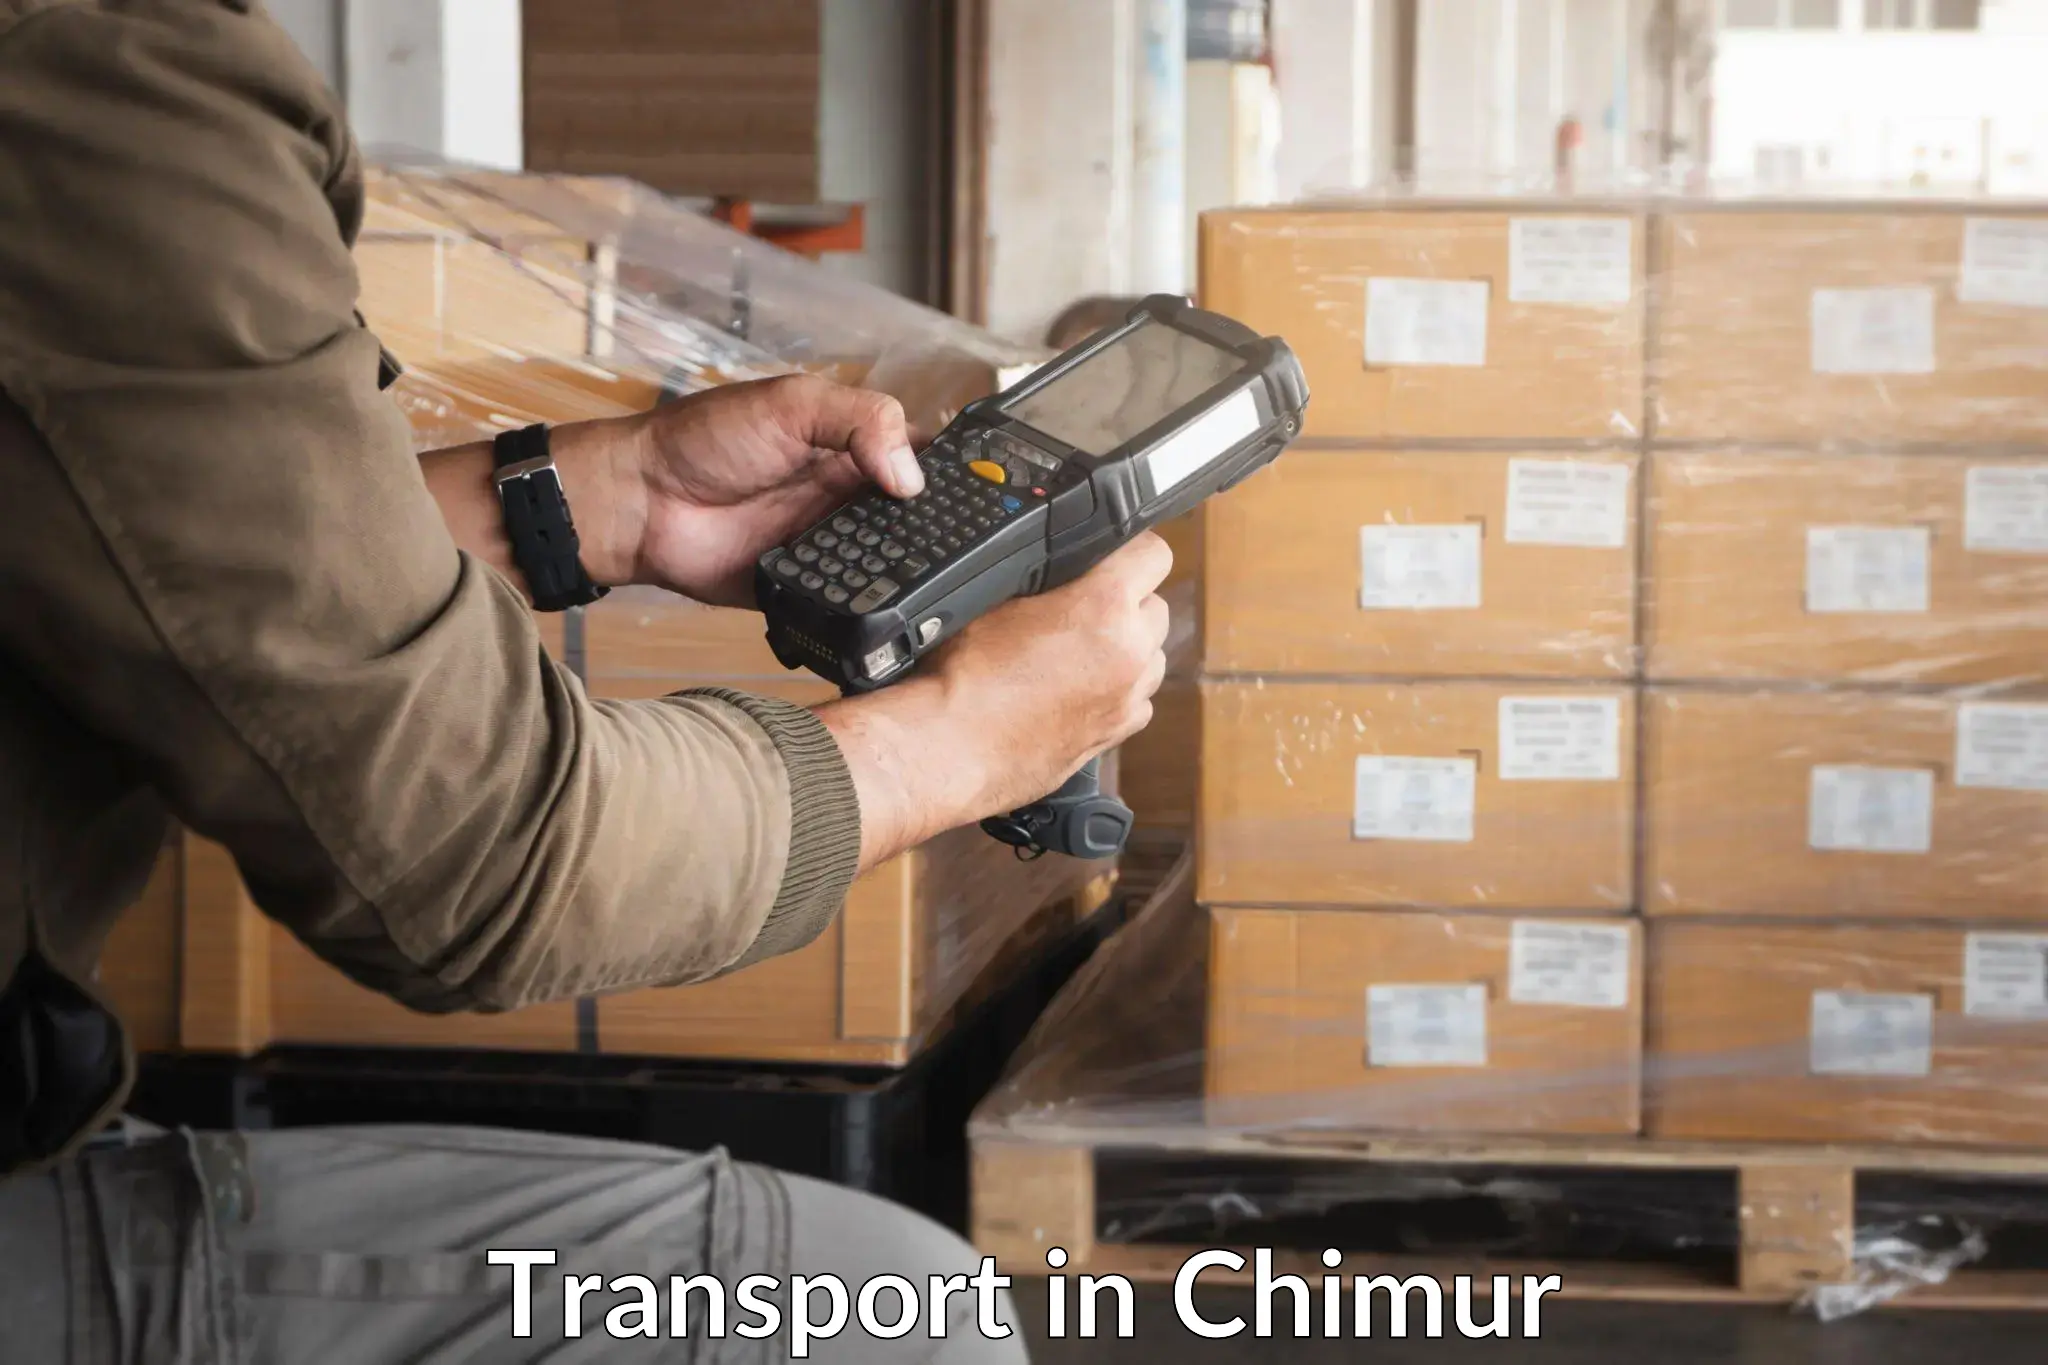 Container transport service in Chimur